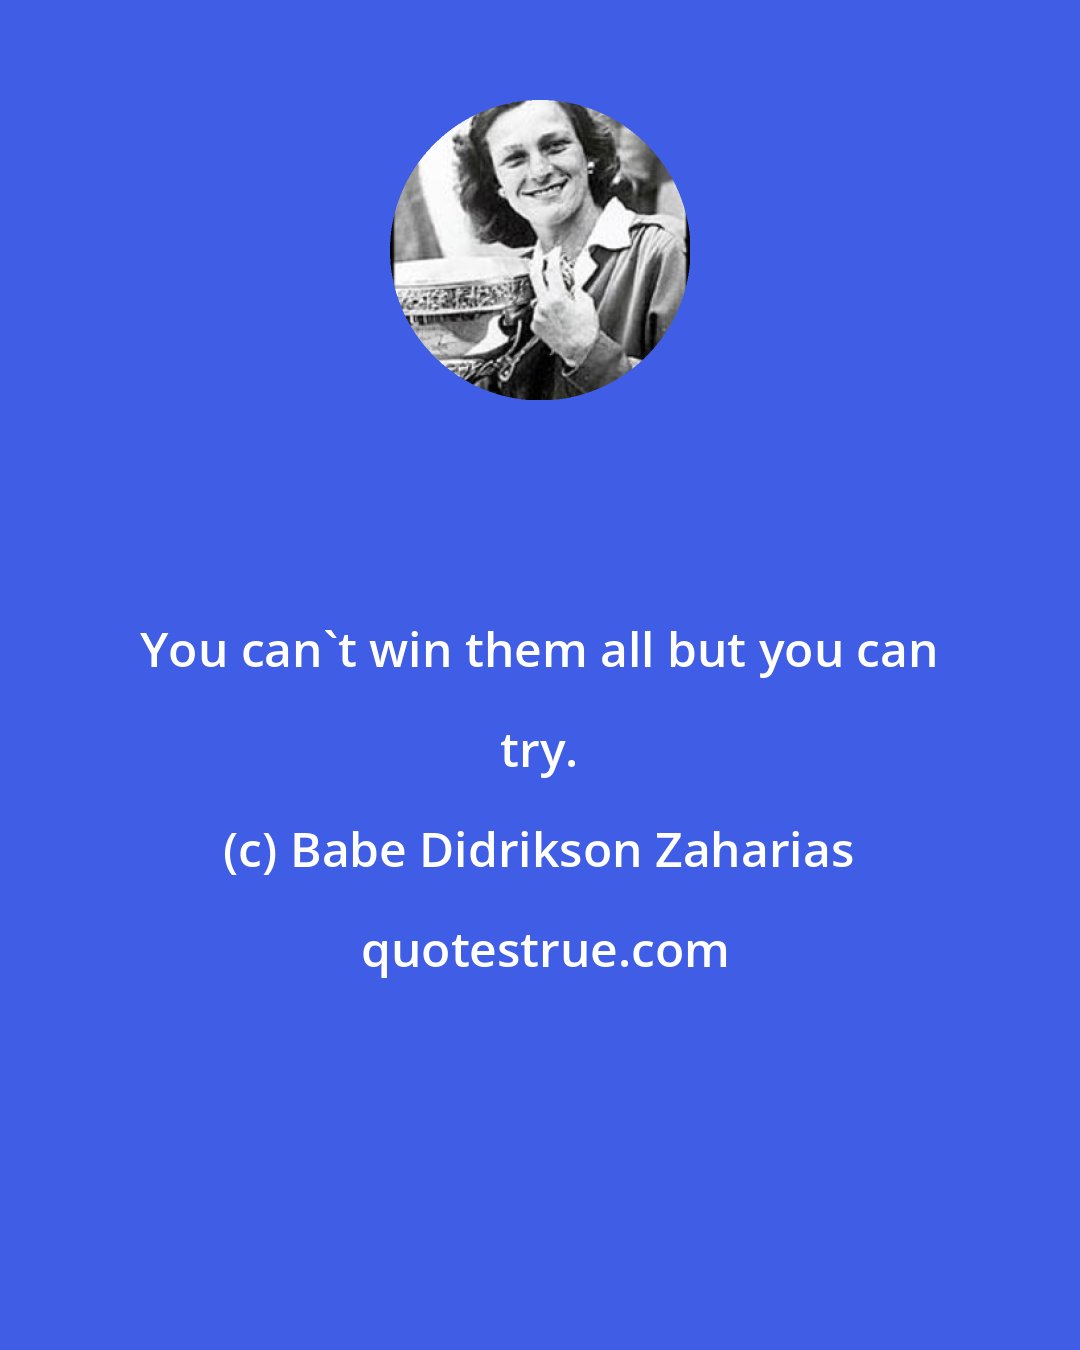 Babe Didrikson Zaharias: You can't win them all but you can try.